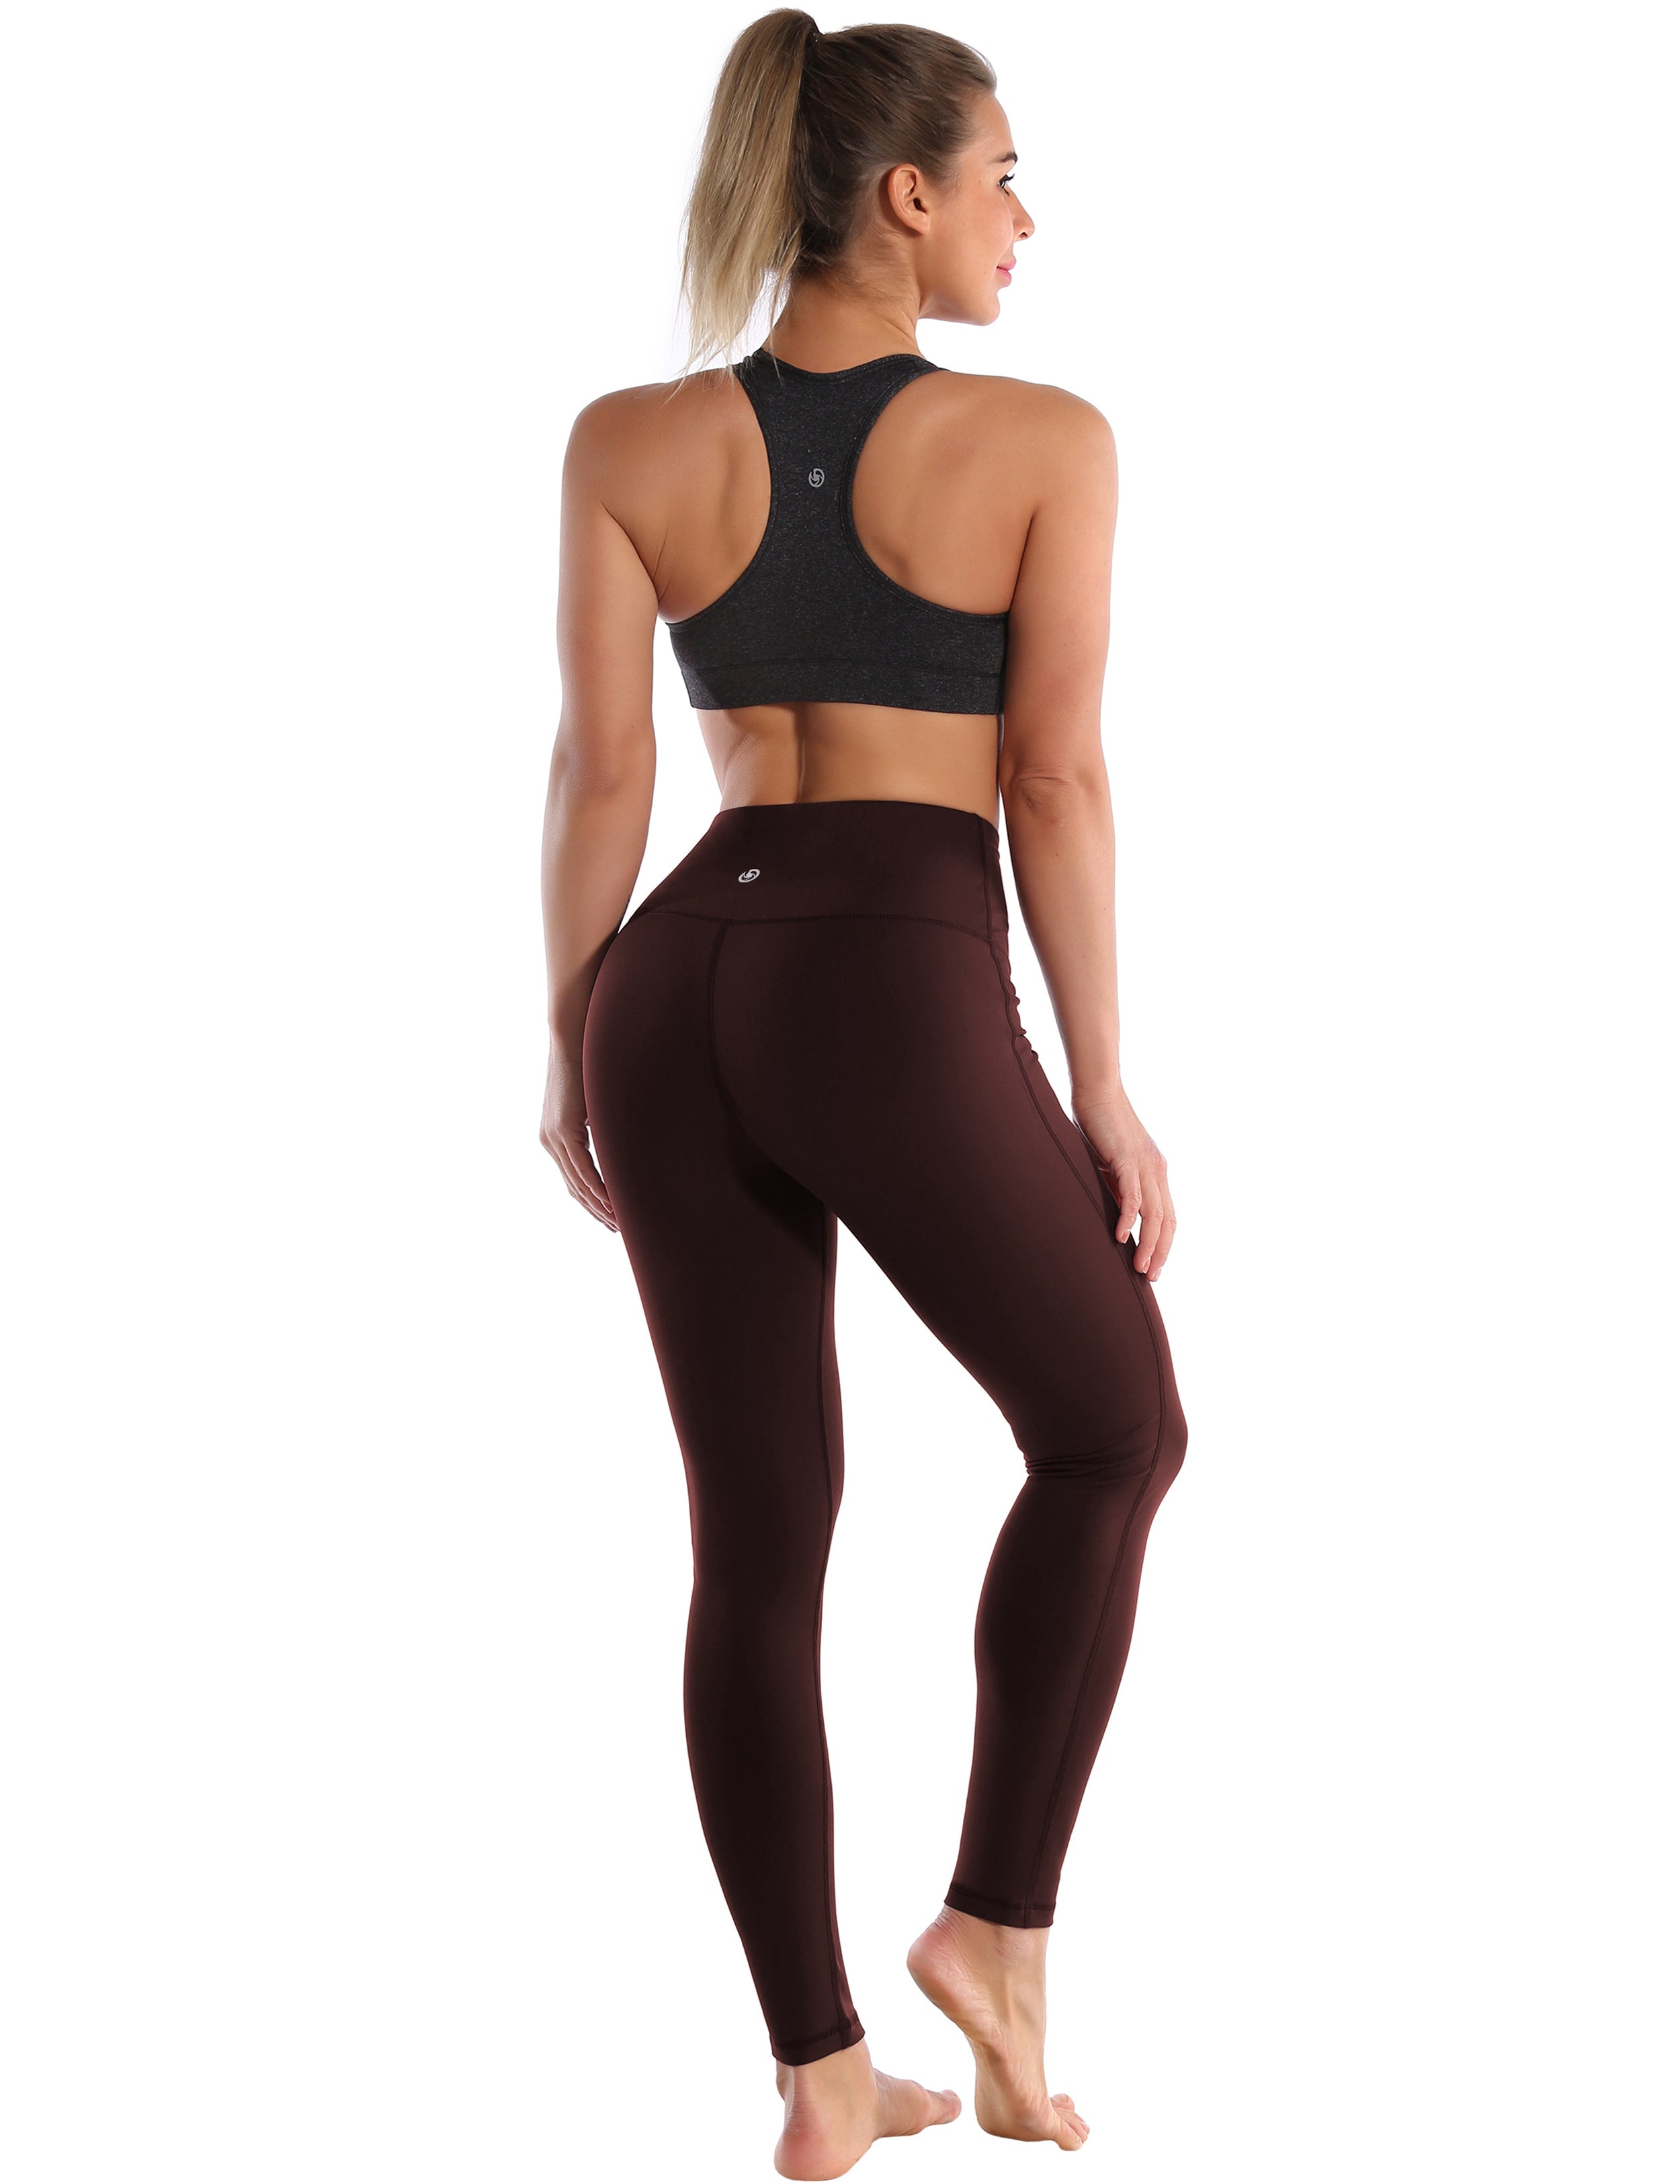 High Waist Side Line Pilates Pants mahoganymaroon Side Line is Make Your Legs Look Longer and Thinner 75%Nylon/25%Spandex Fabric doesn't attract lint easily 4-way stretch No see-through Moisture-wicking Tummy control Inner pocket Two lengths